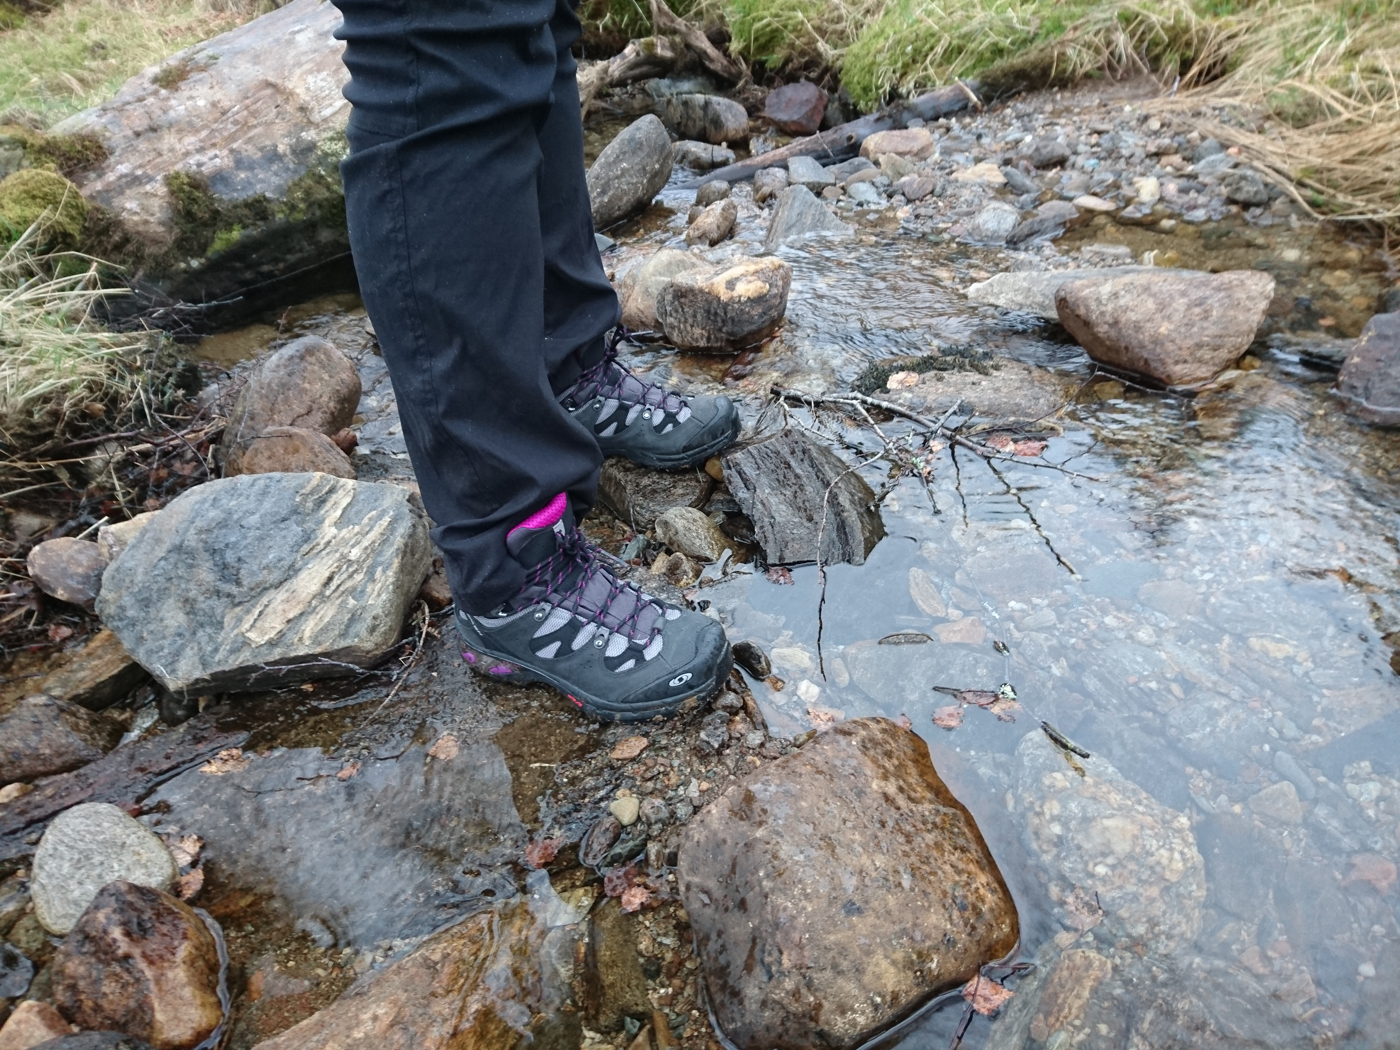 Craghoppers Kiwi Pro Stretch Hiking Trouser Review Walkers Love Them!